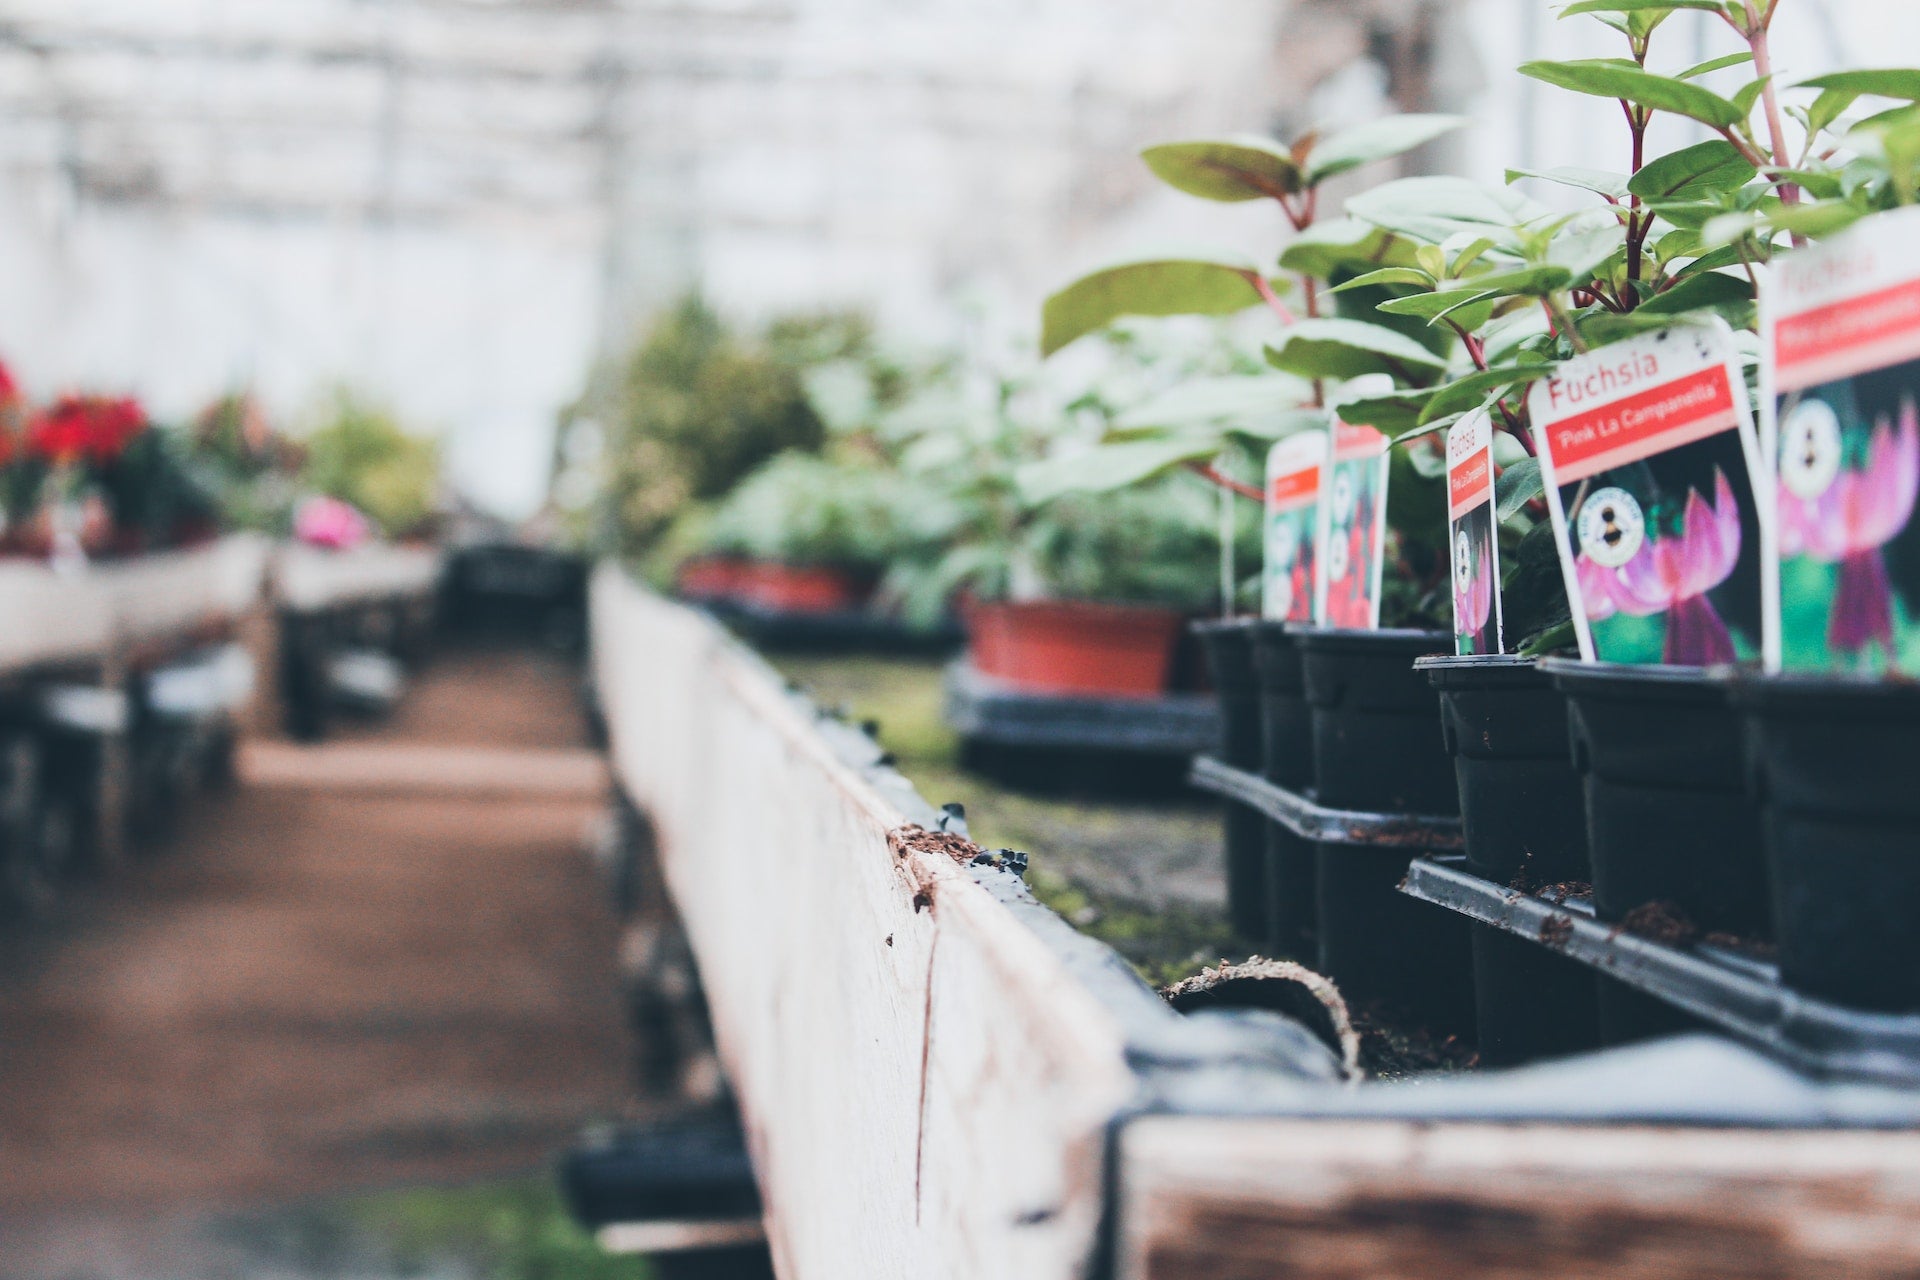 Where should you buy your plants?